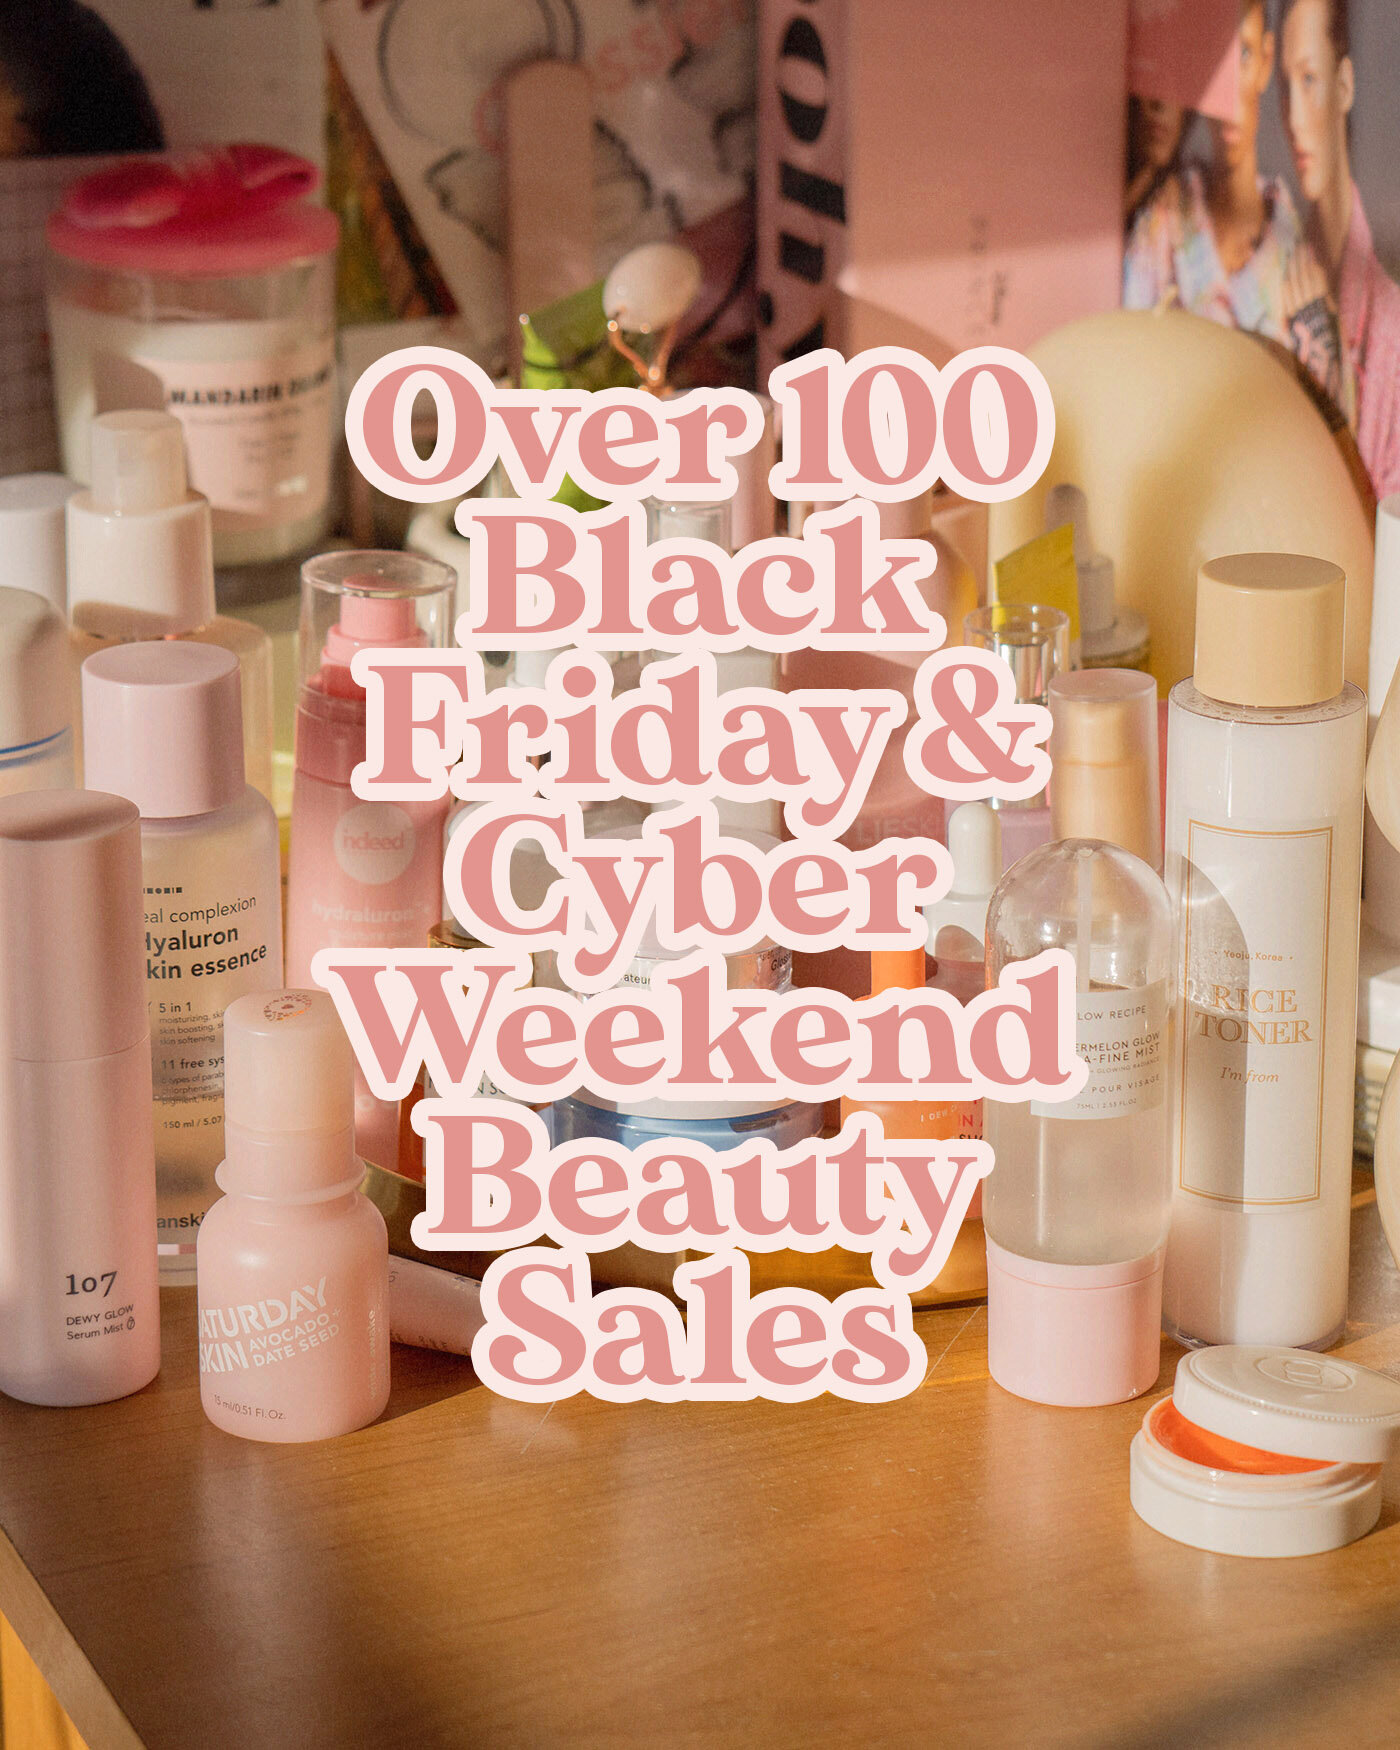 Makeup Forever Cyber Week Sale - 30% off everything for members